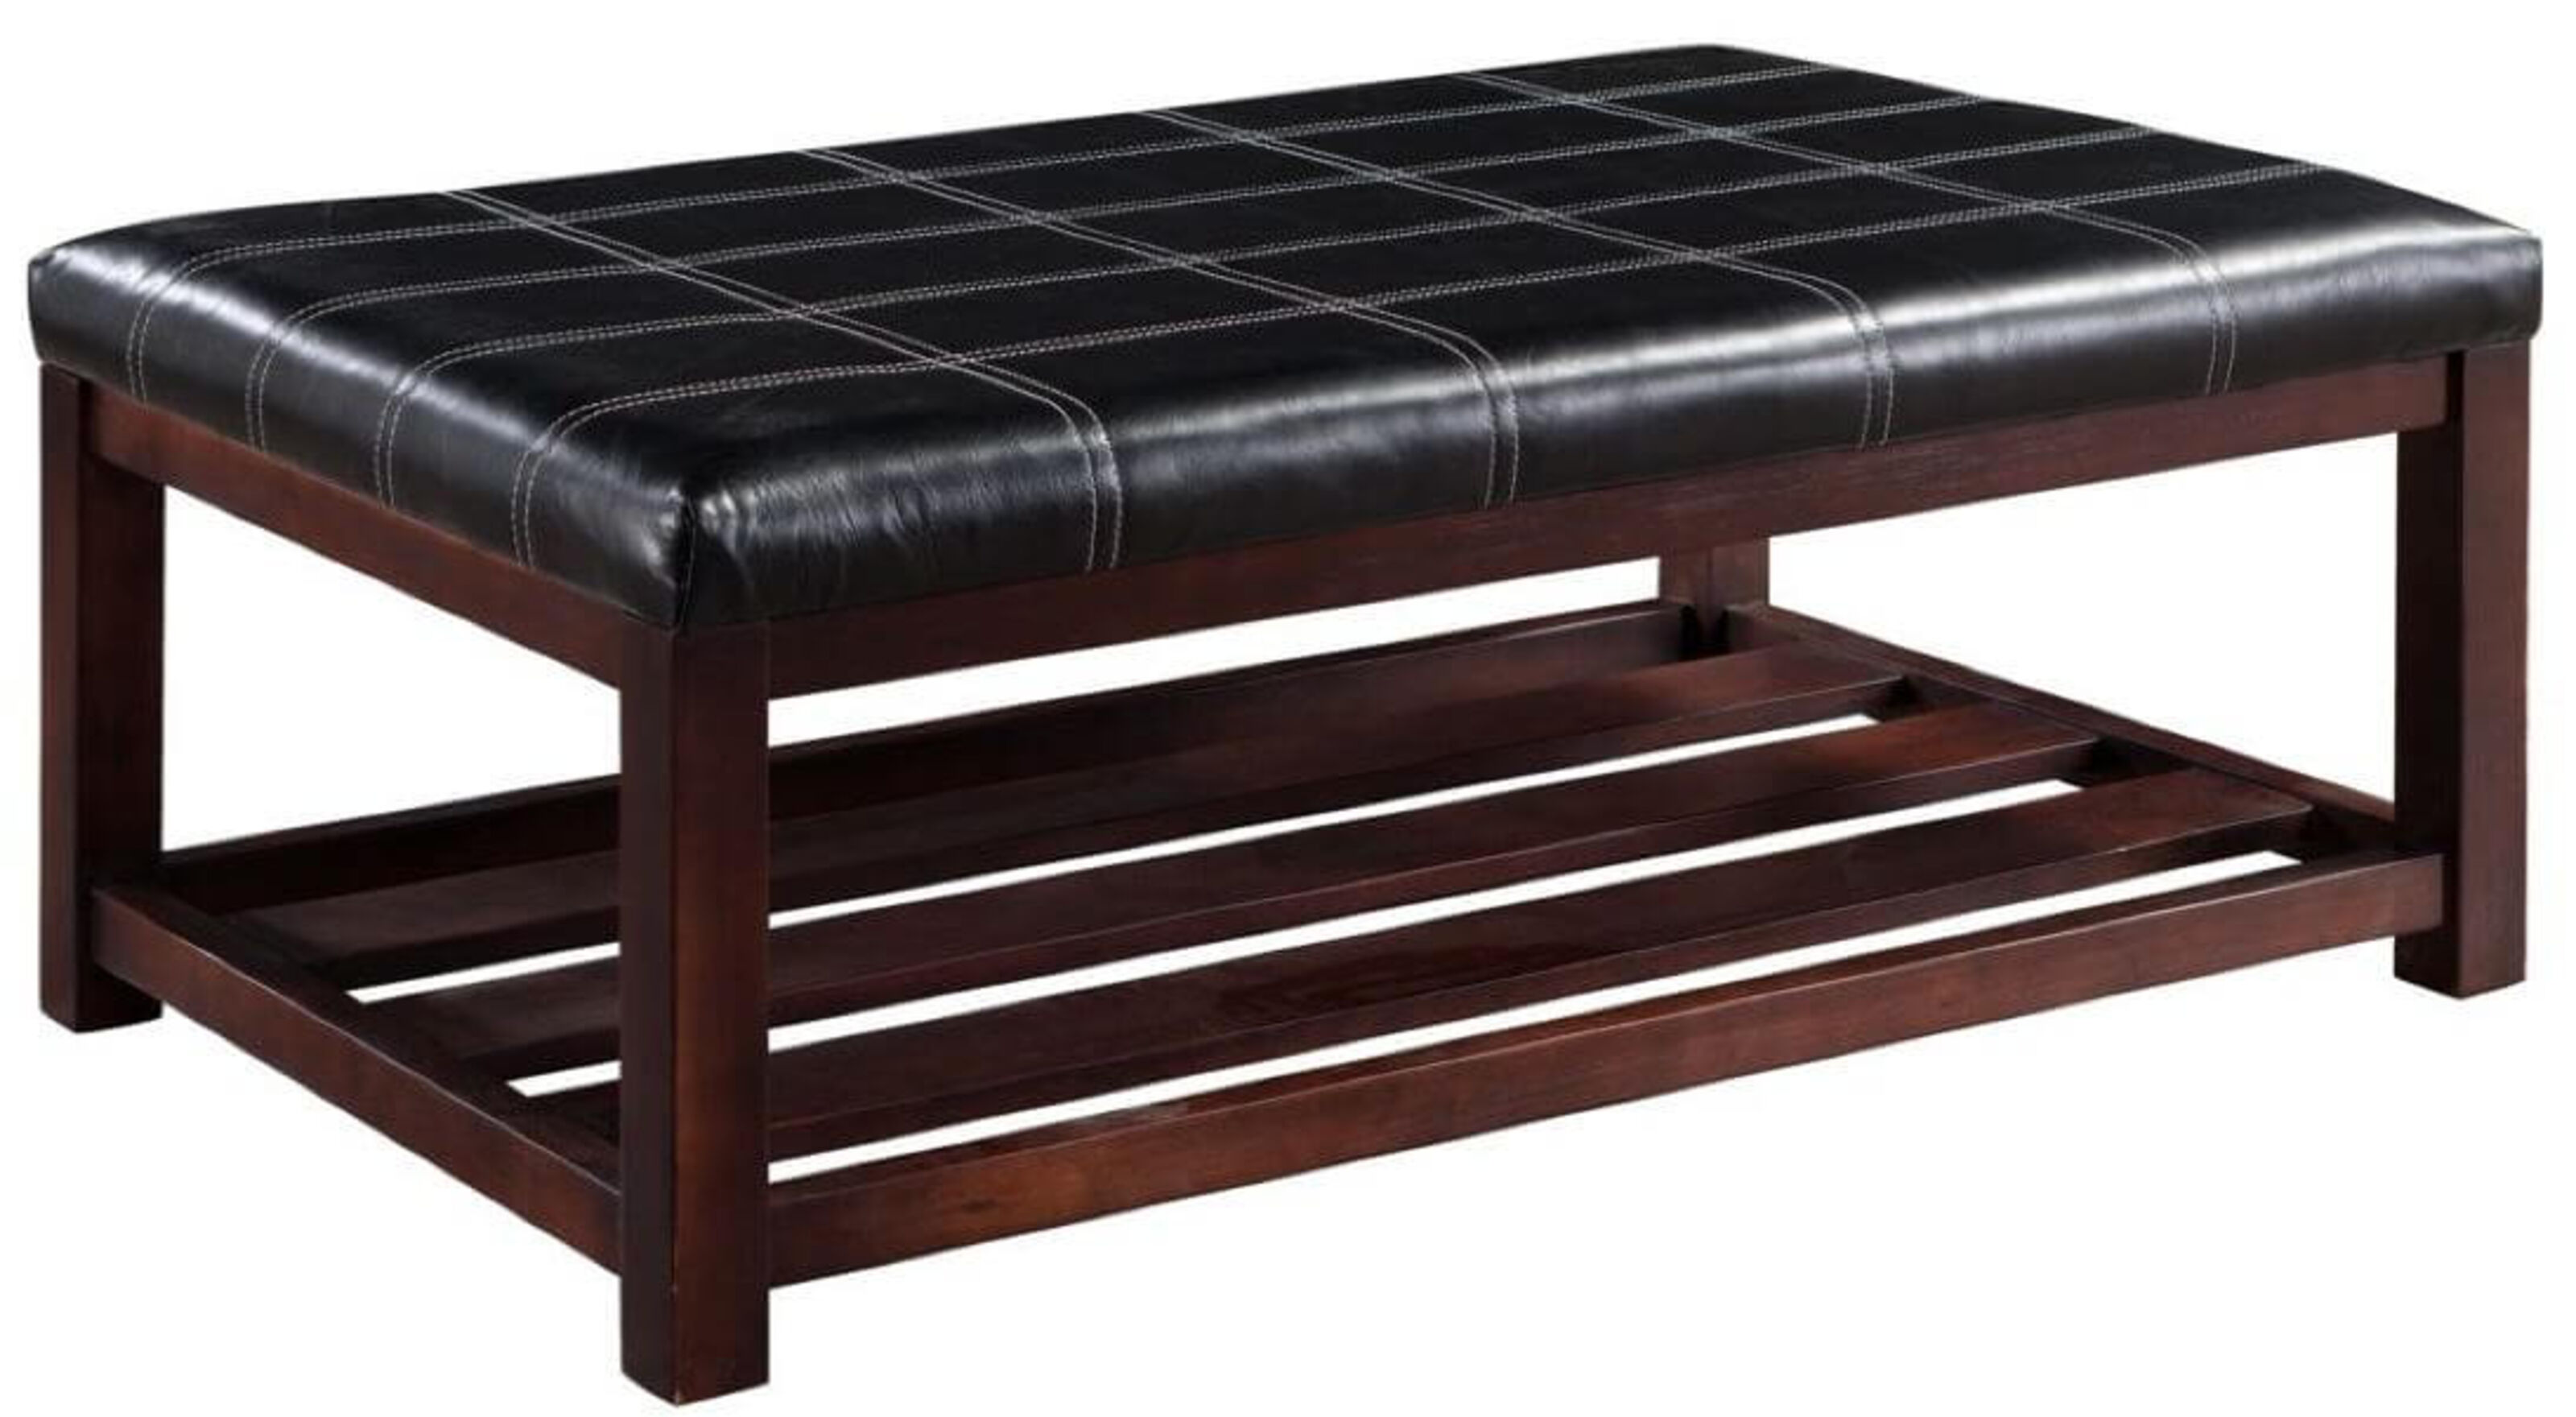 Leather Top Coffee Table Vintage, Leather Coffe Table